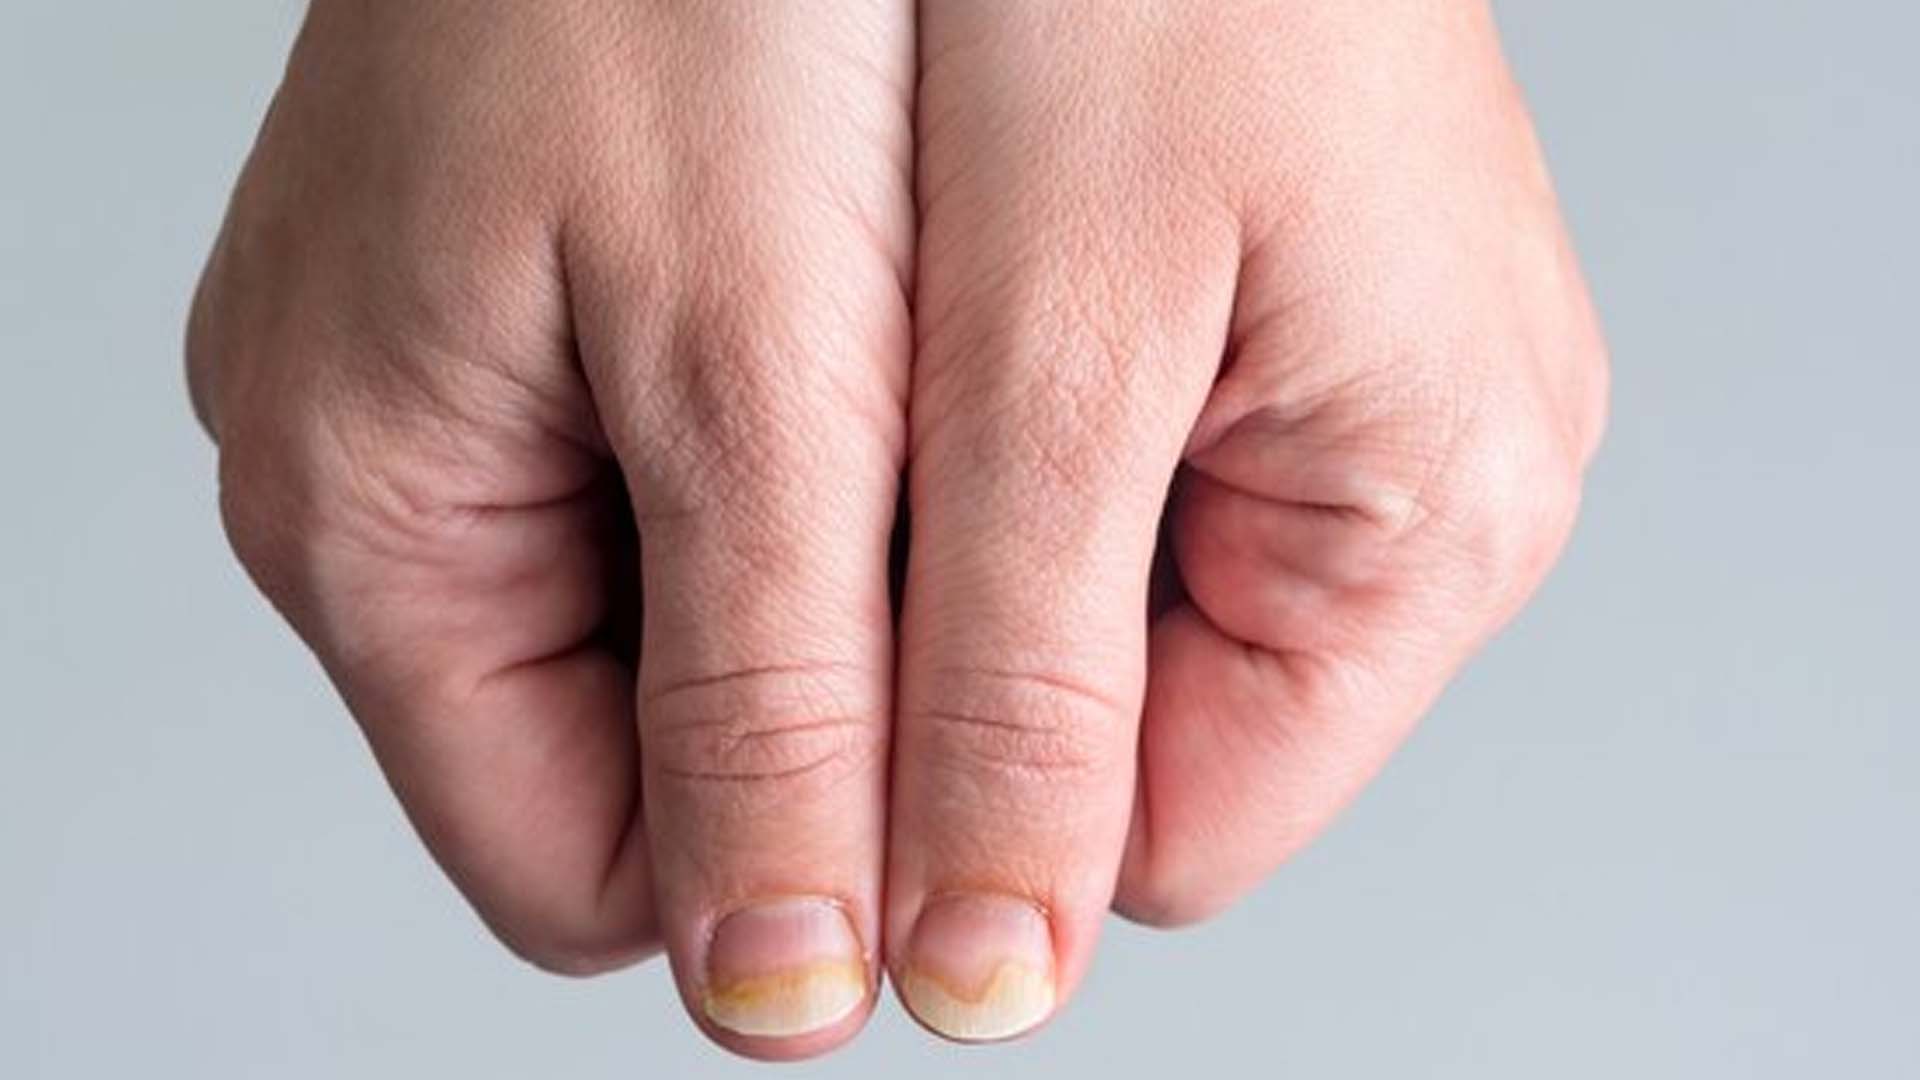 What are the Home Remedies for Pus under the Fingernail?